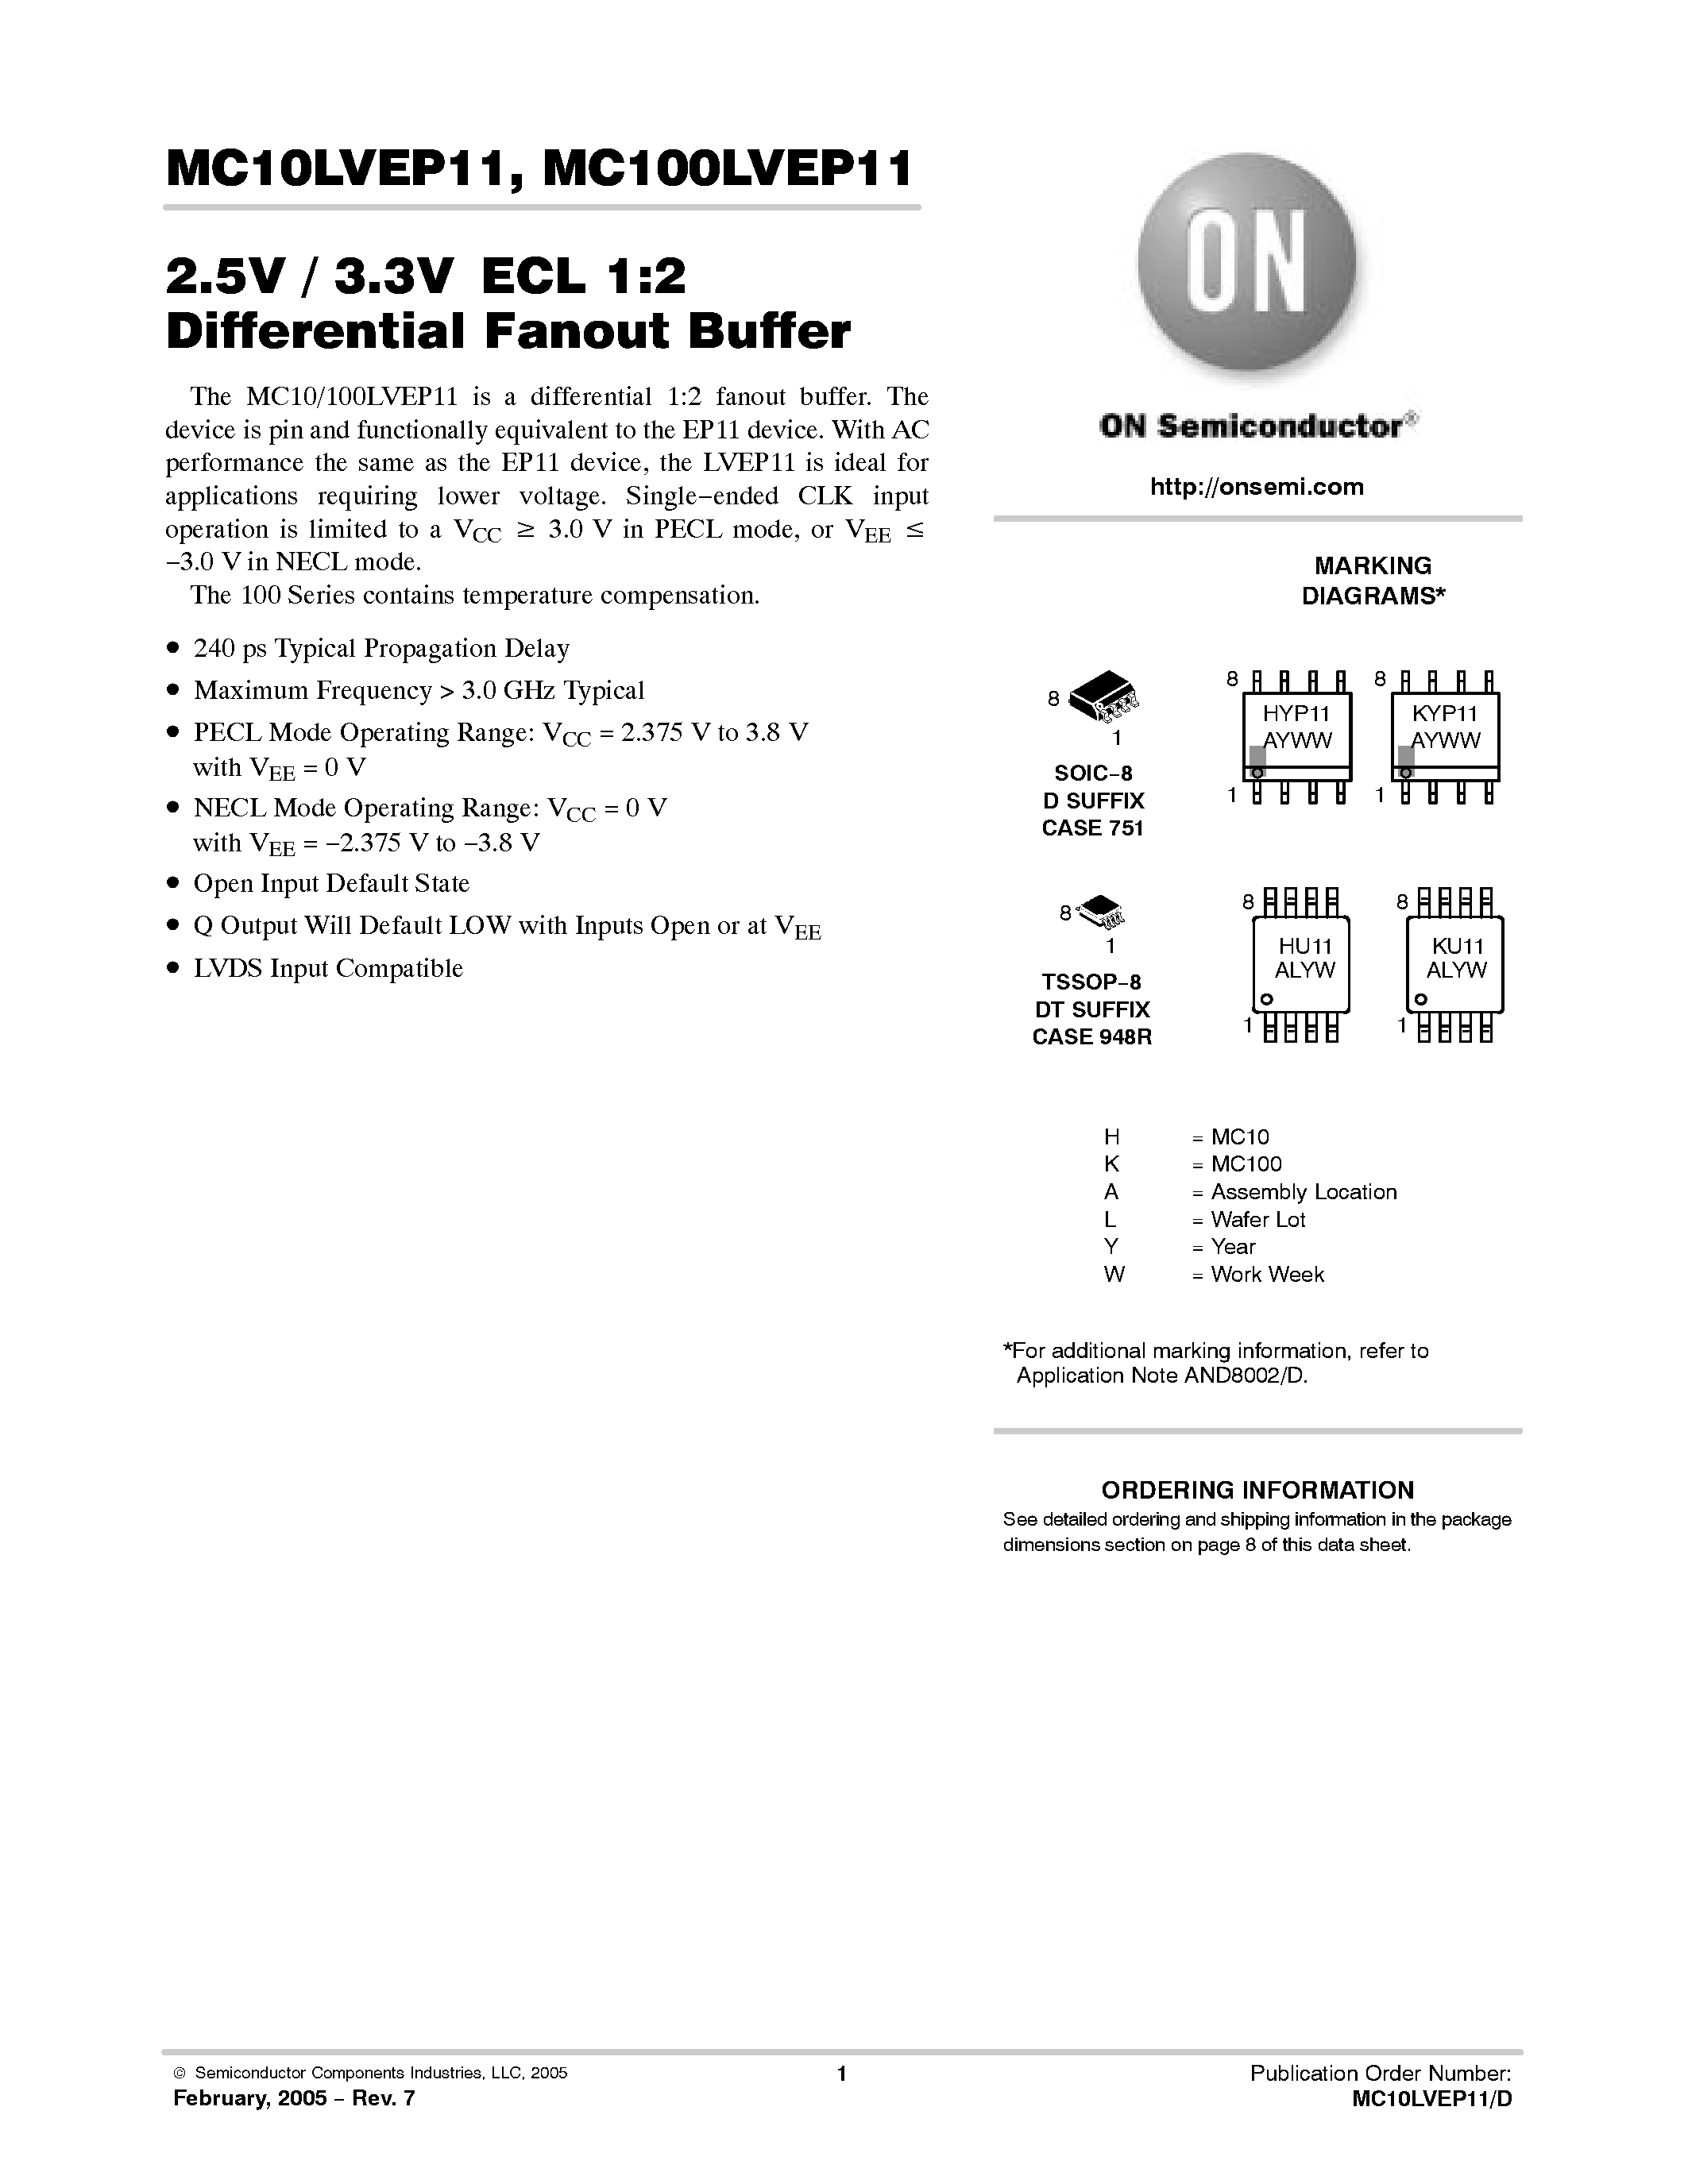 Datasheet MC100LVEP11 - 2.5V / 3.3V ECL 1:2 Differential Fanout Buffer page 1